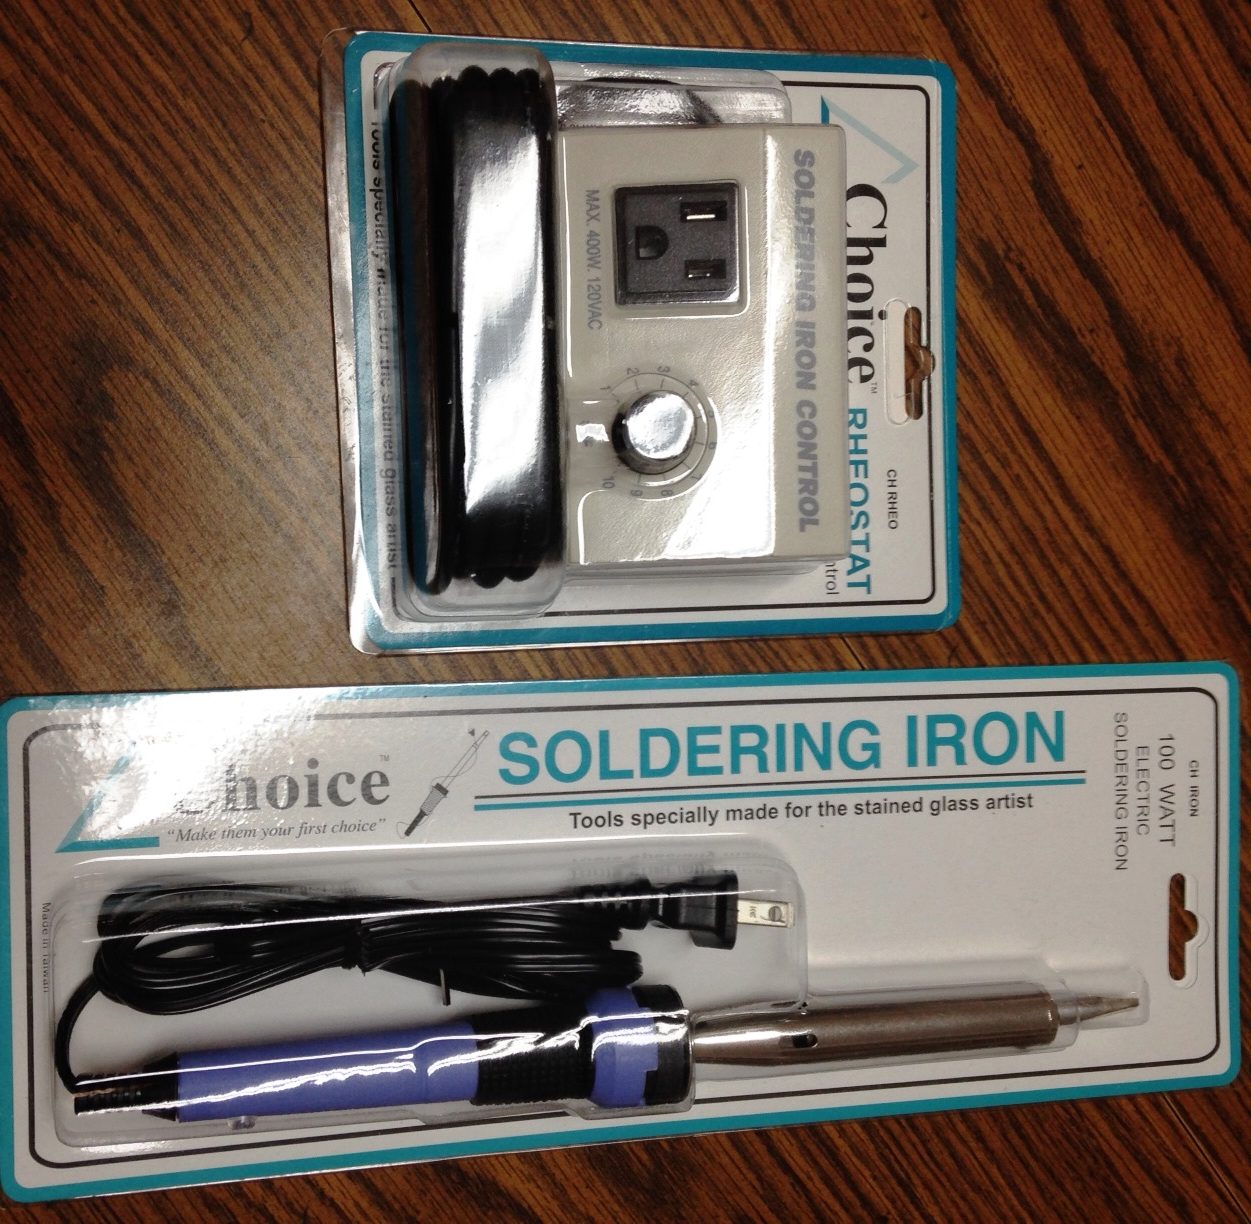 Best Seller Stained Glass Soldering Kit Includes IRON Rheostat